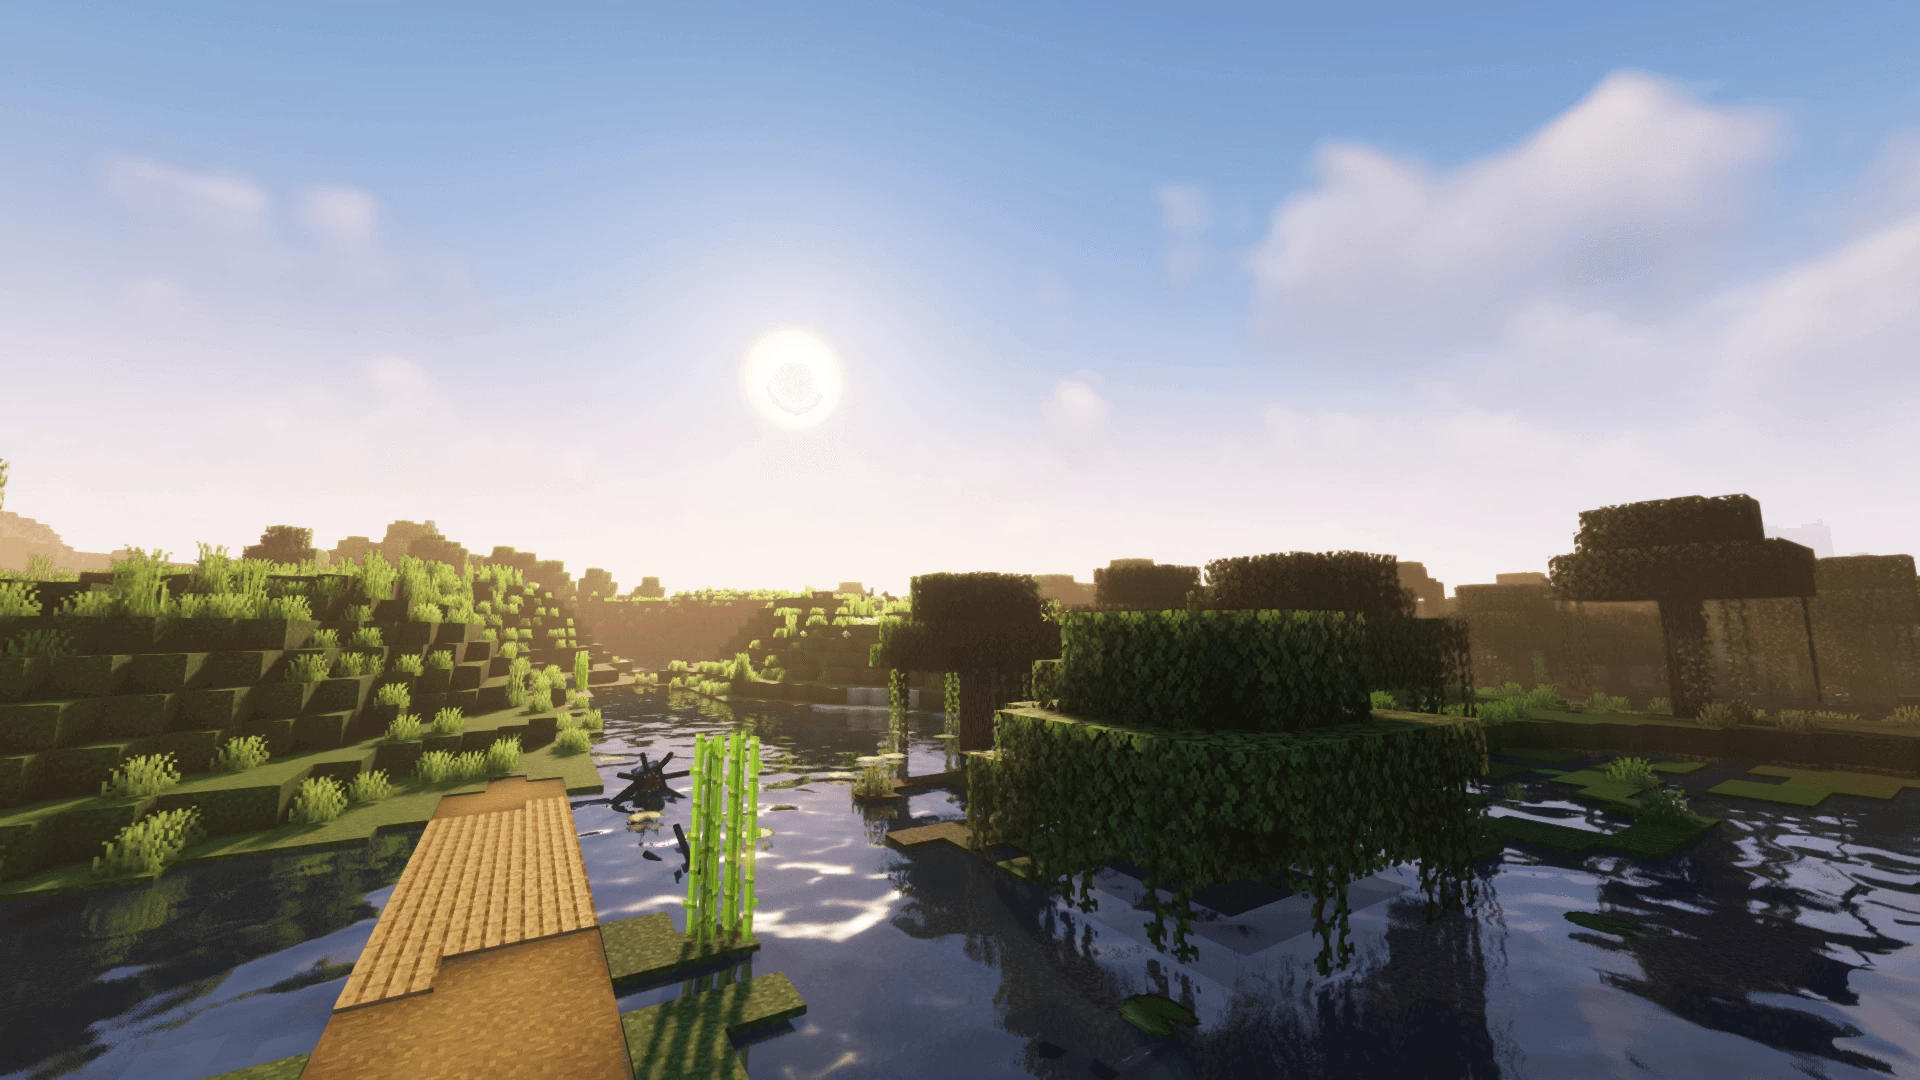 minecraft texture pack with shaders